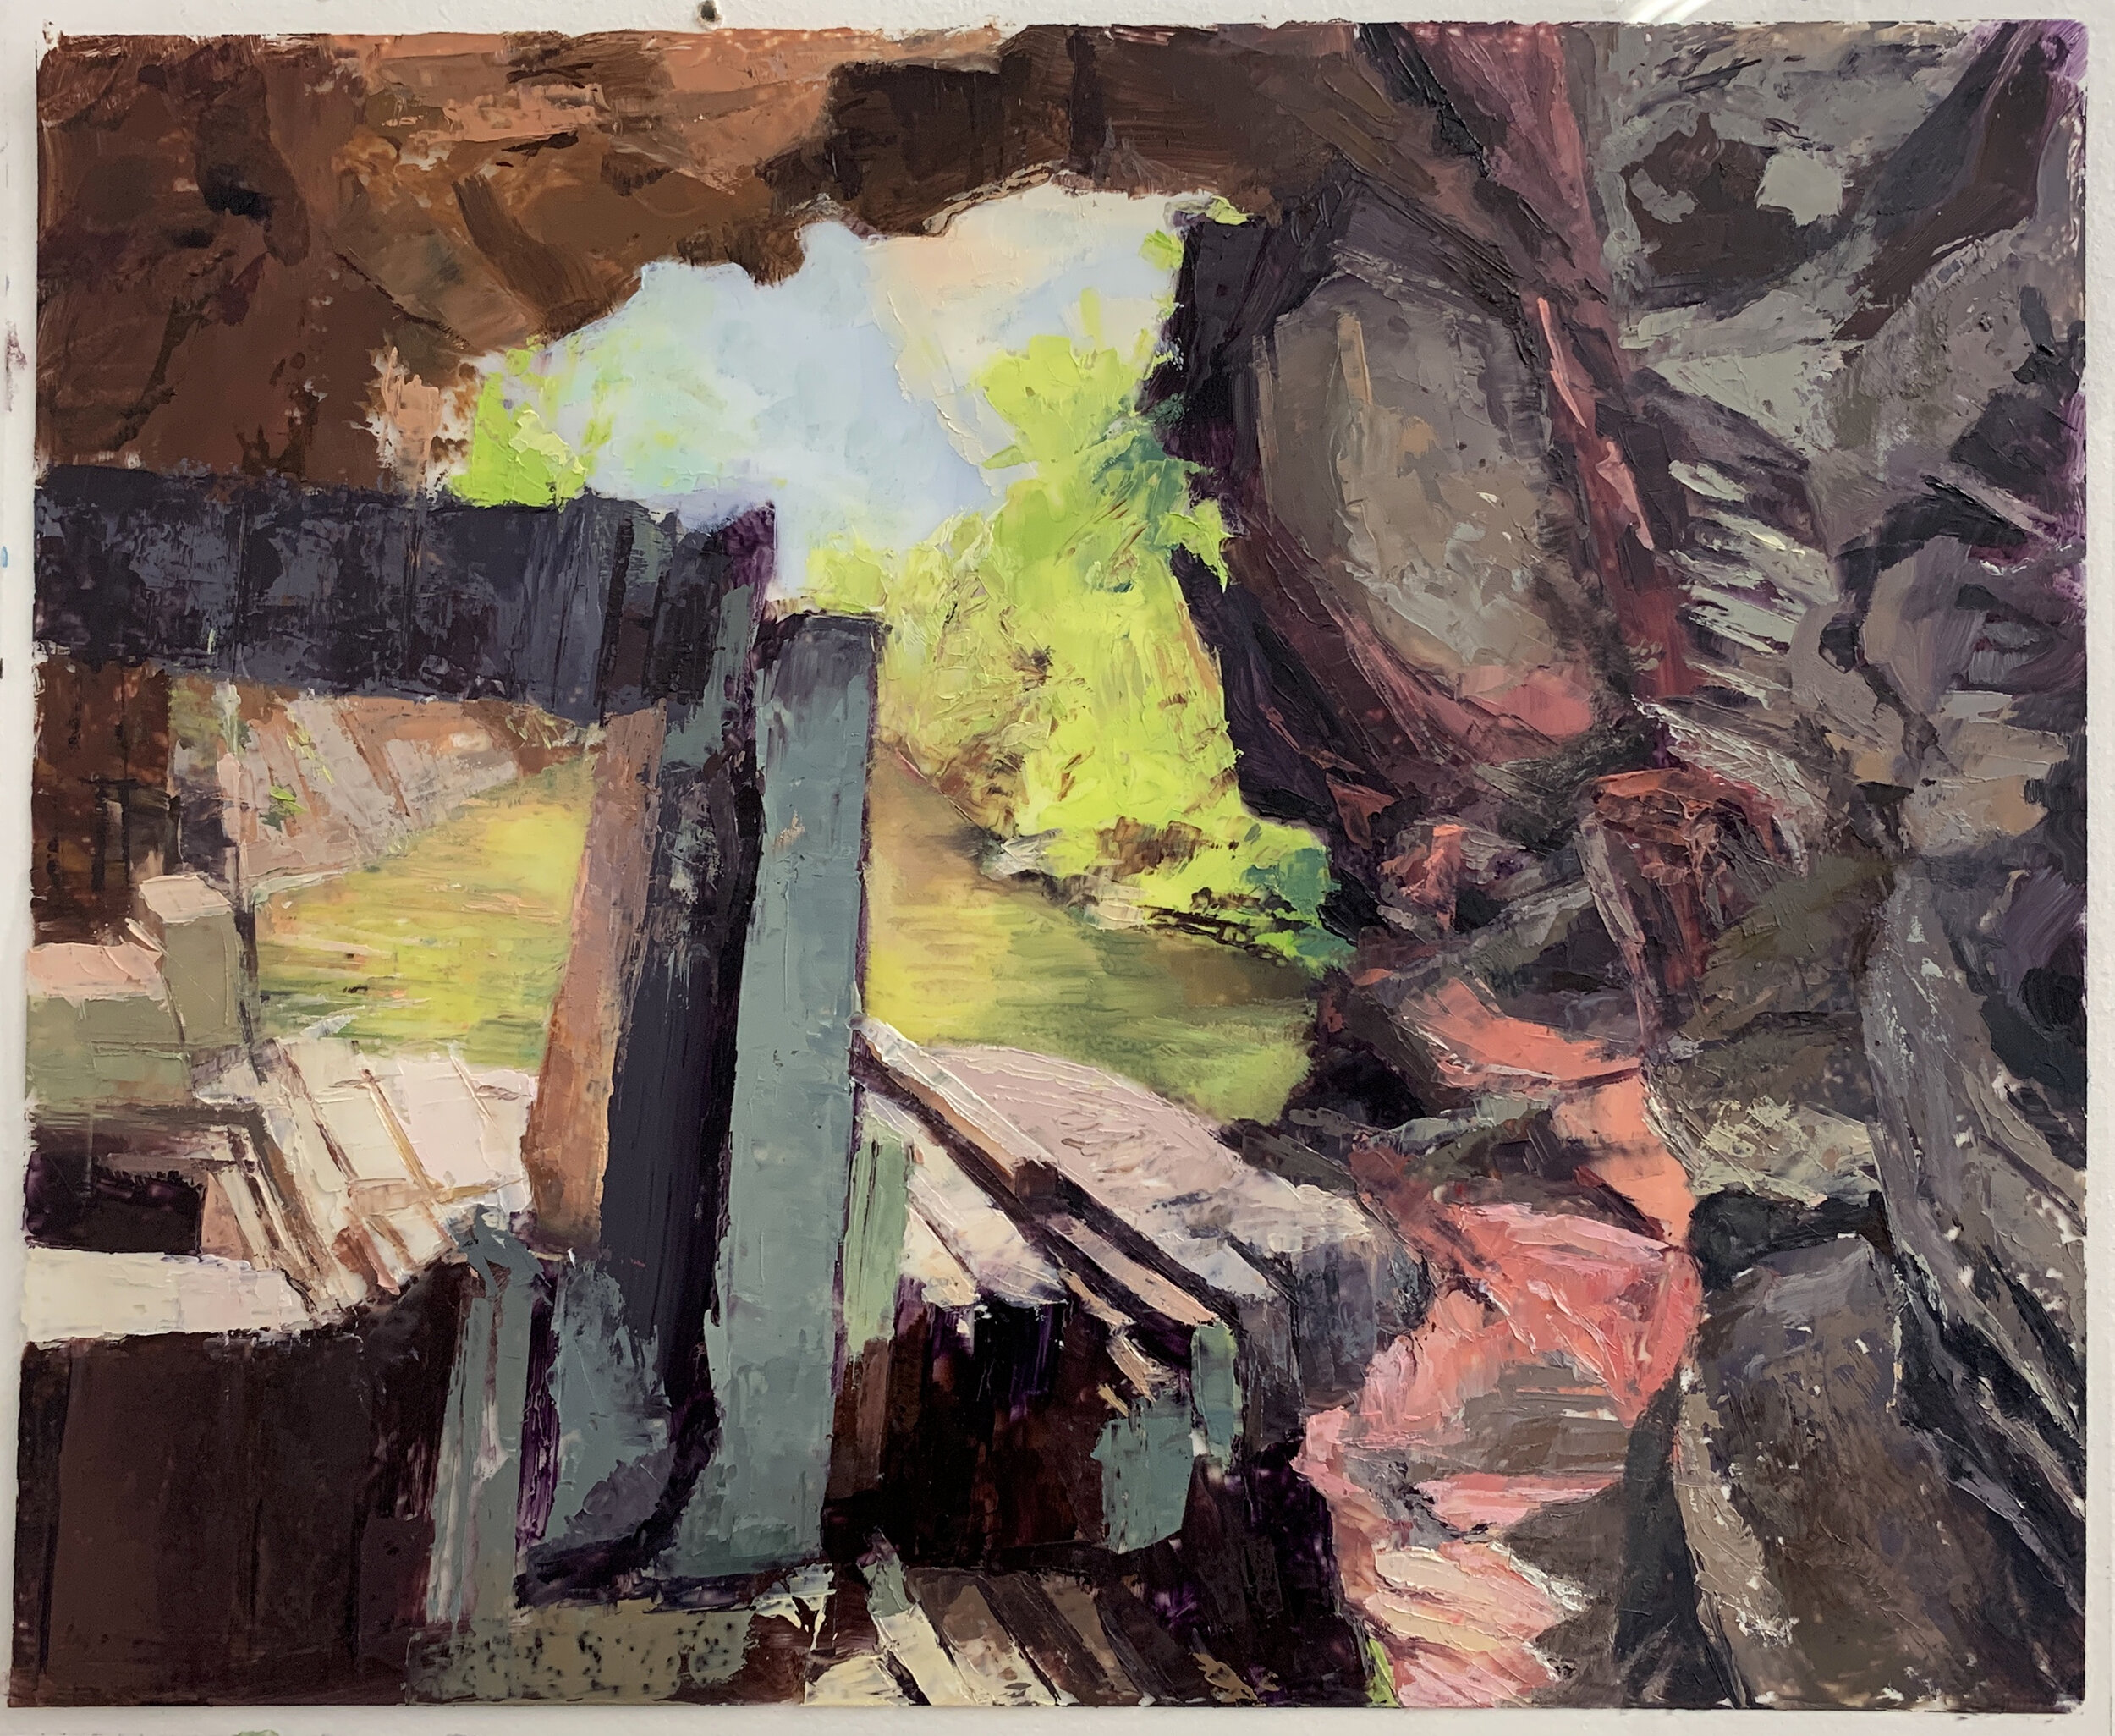   Trang An Grottoes , 2019 Oil on dura-lar, 12 x 14 in 